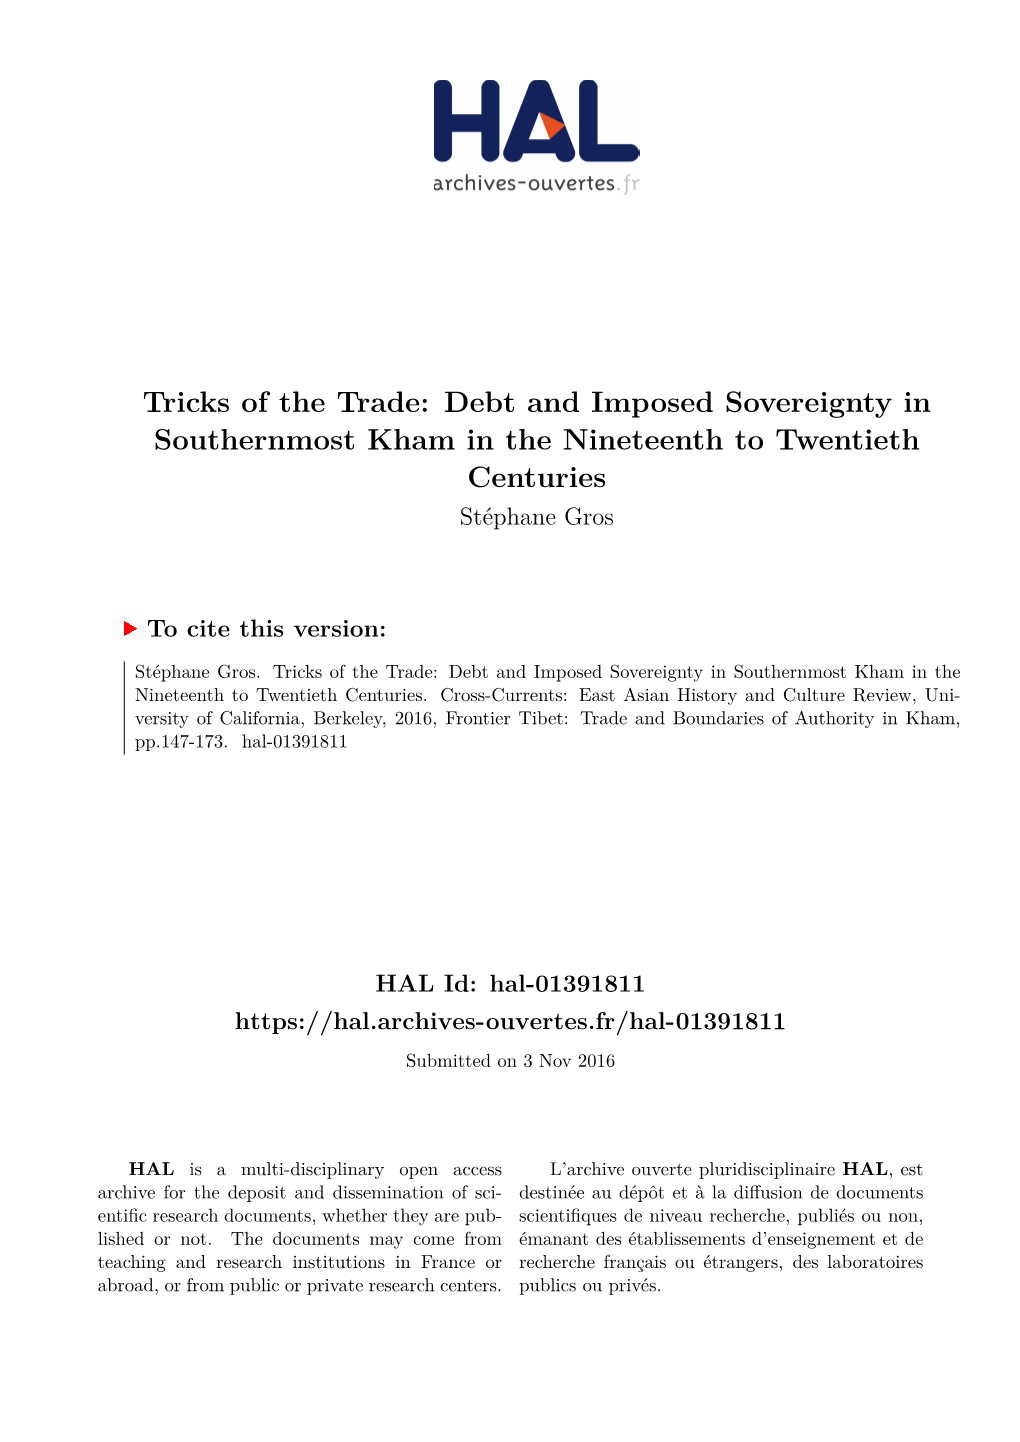 Tricks of the Trade: Debt and Imposed Sovereignty in Southernmost Kham in the Nineteenth to Twentieth Centuries Stéphane Gros